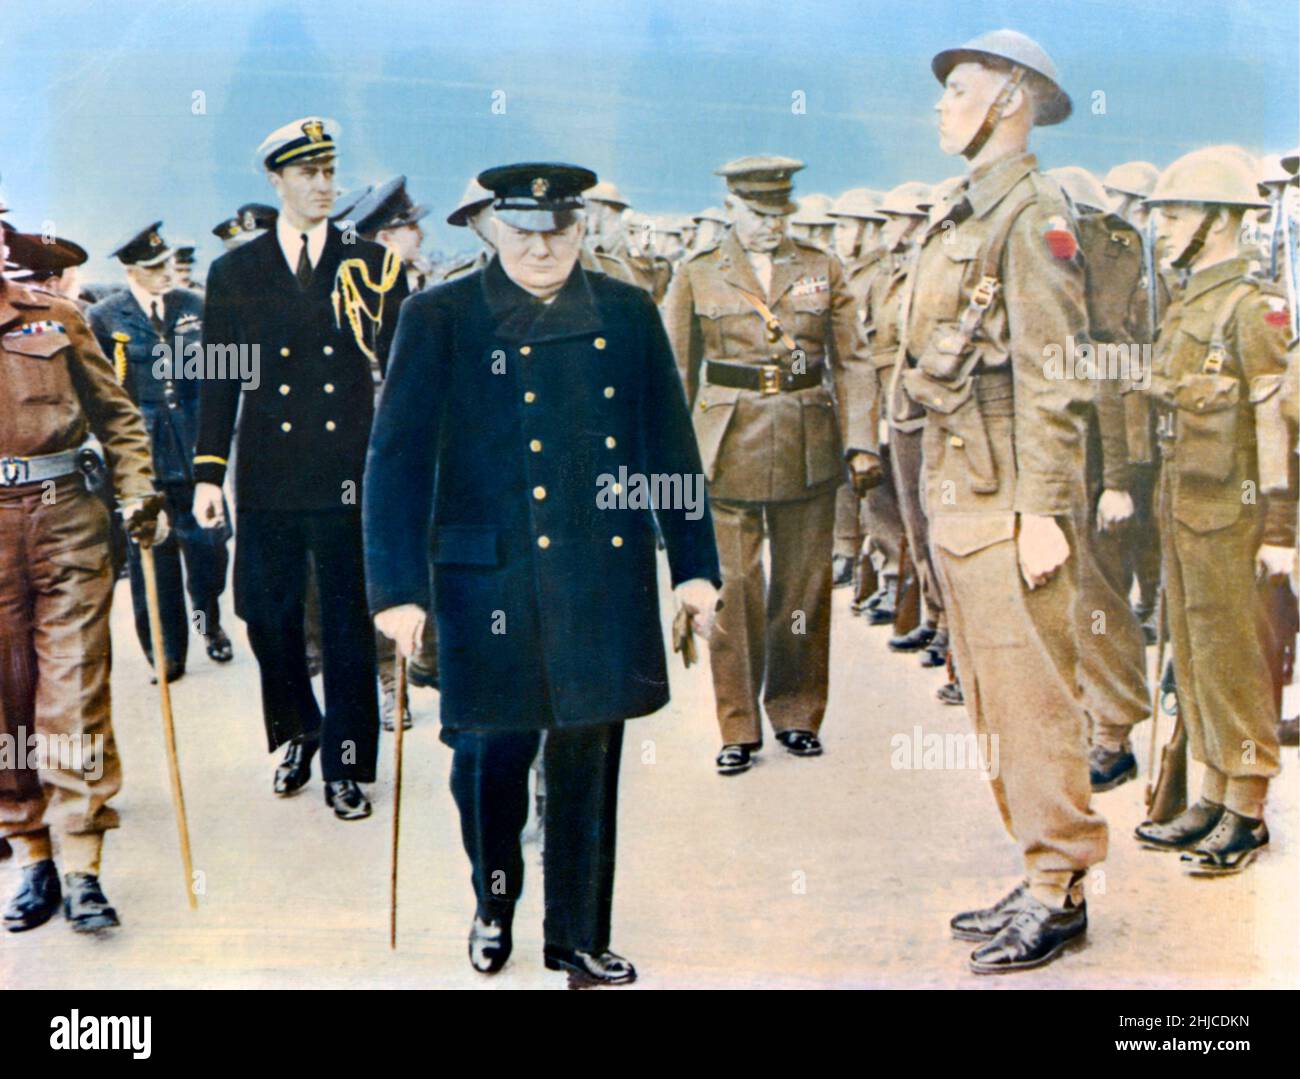 Winston Churchill. British statesman who served as Prime minister of the United Kingdom from 1940 to 1945 during the Second world war. Born on november 30 1874, dead january 24 1965. Pictured inspecting troubs walking along the men together with other officers. Stock Photo